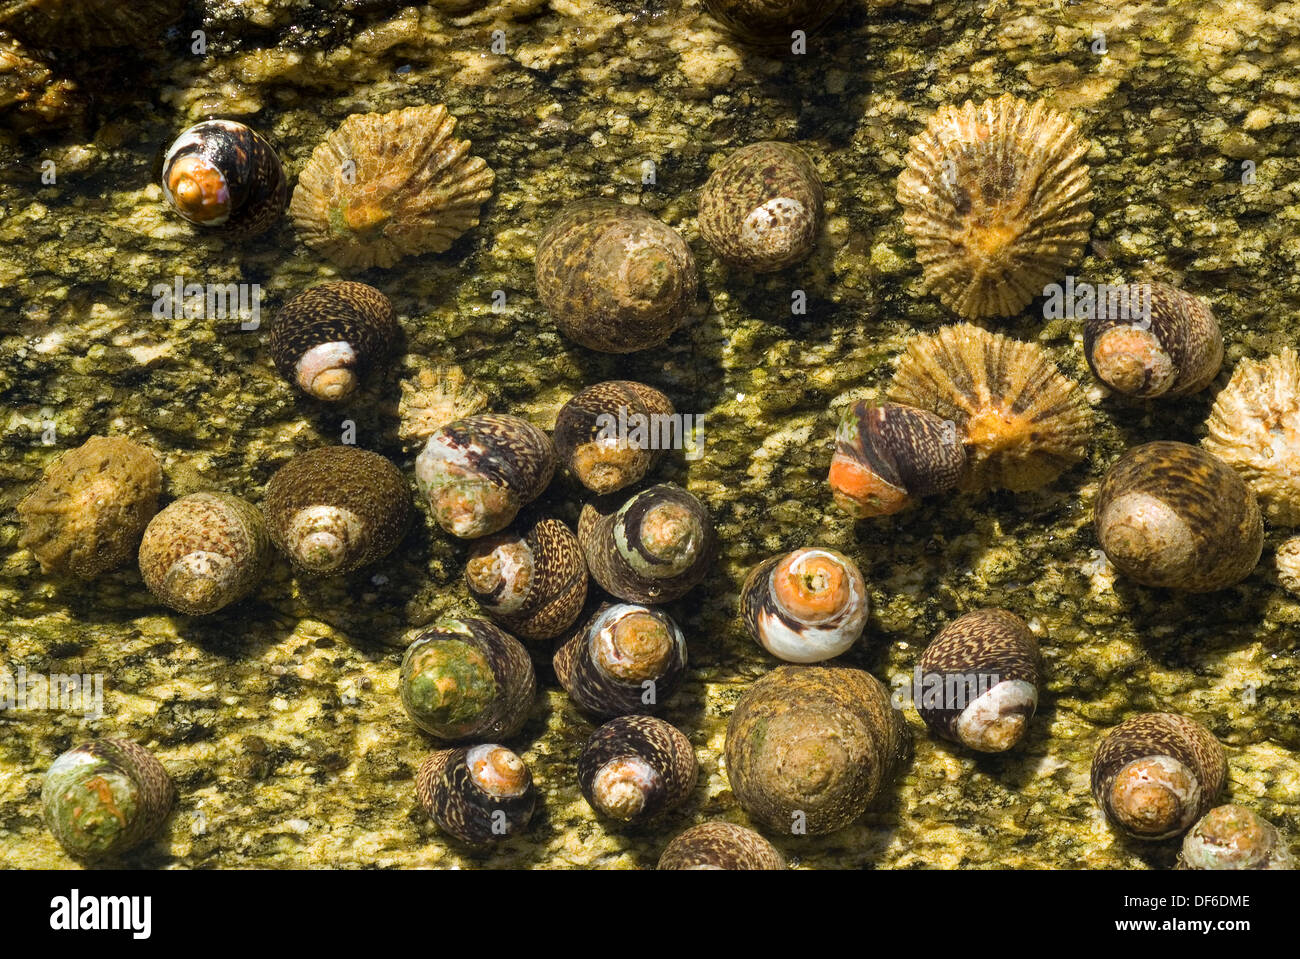 Group of winkles and limpets in an intertidal pool. Stock Photo